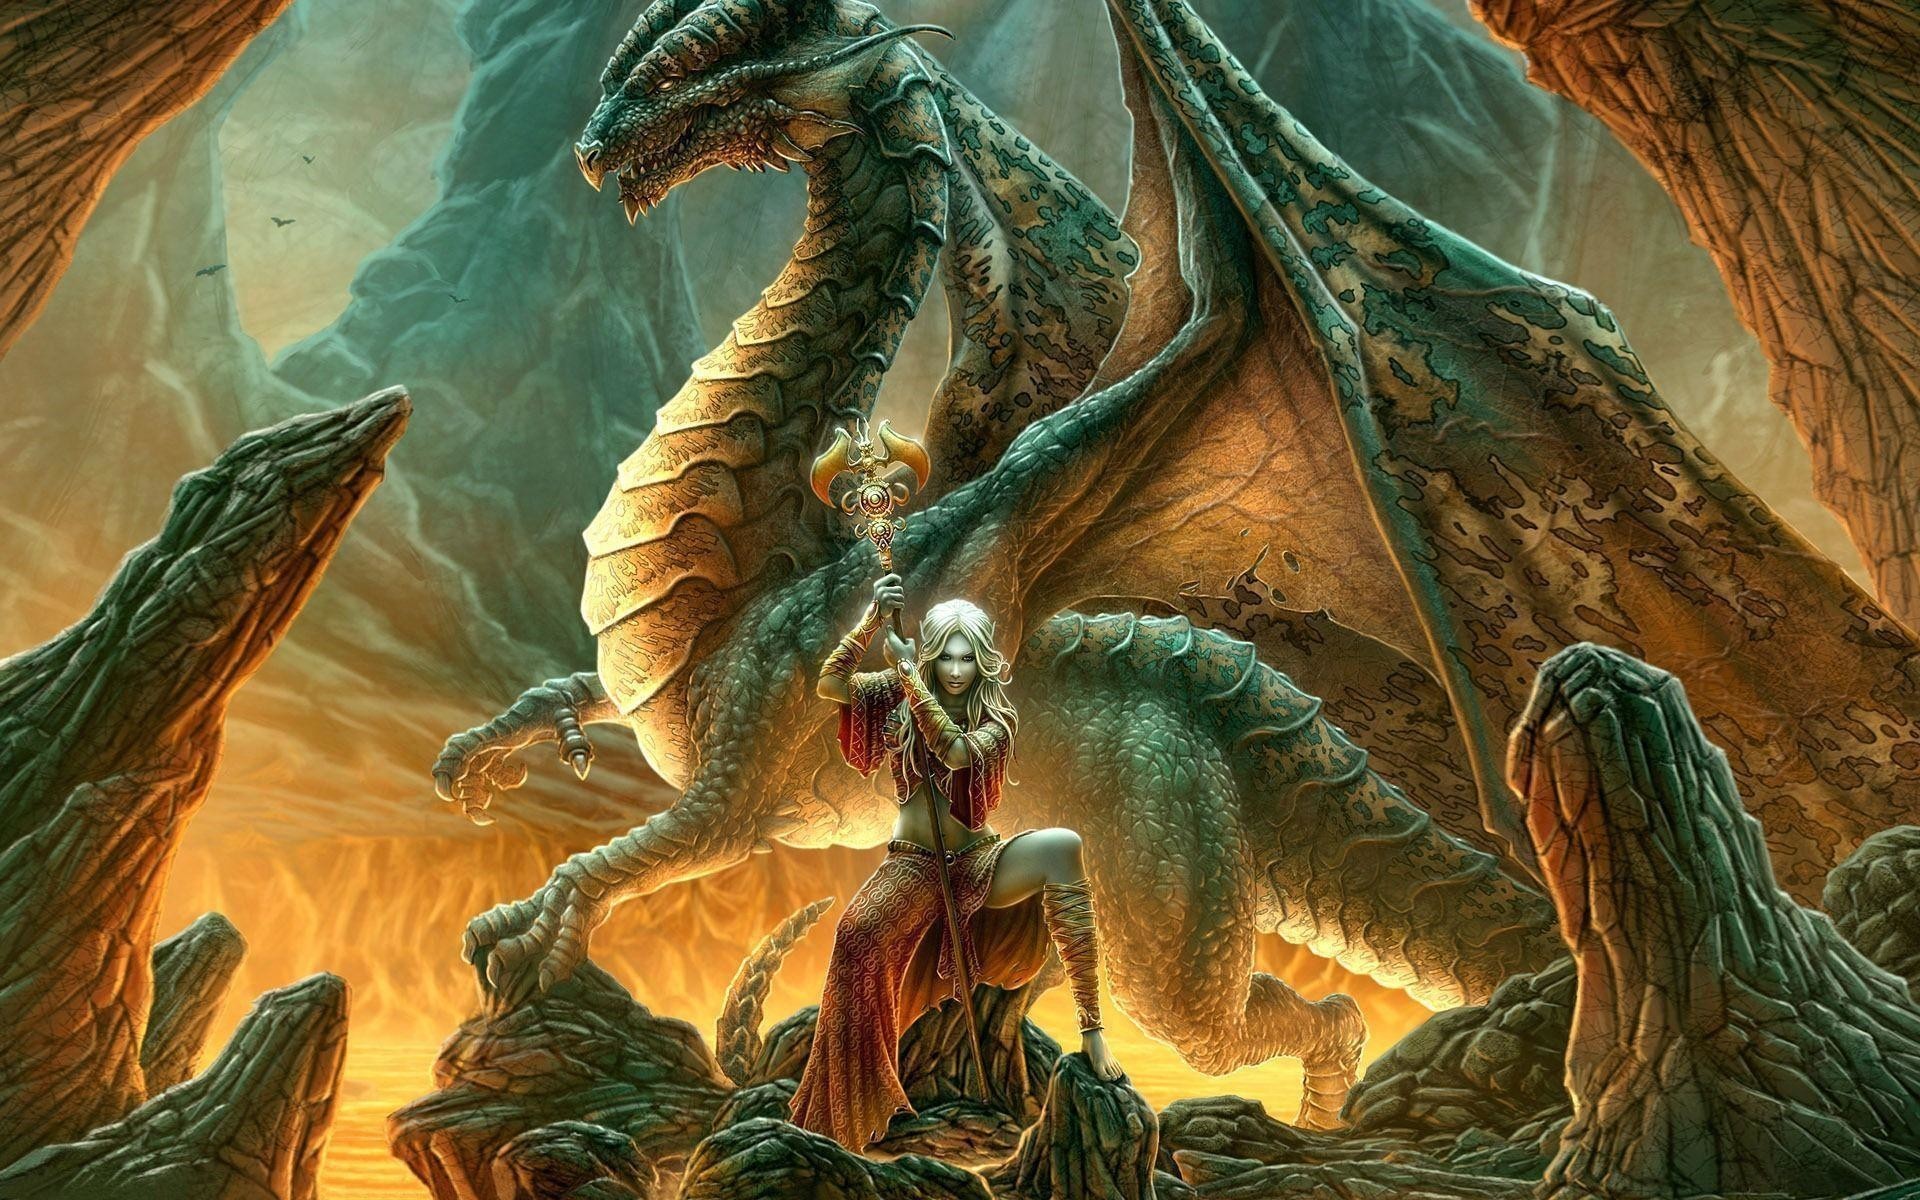 1920x1200  epic-dragon-wallpapers-hd-viewing-gallery-fire-dragon-wallpaper- 1080p-hd- wallpapers-free-download-for-iphone-background-border-full-3d